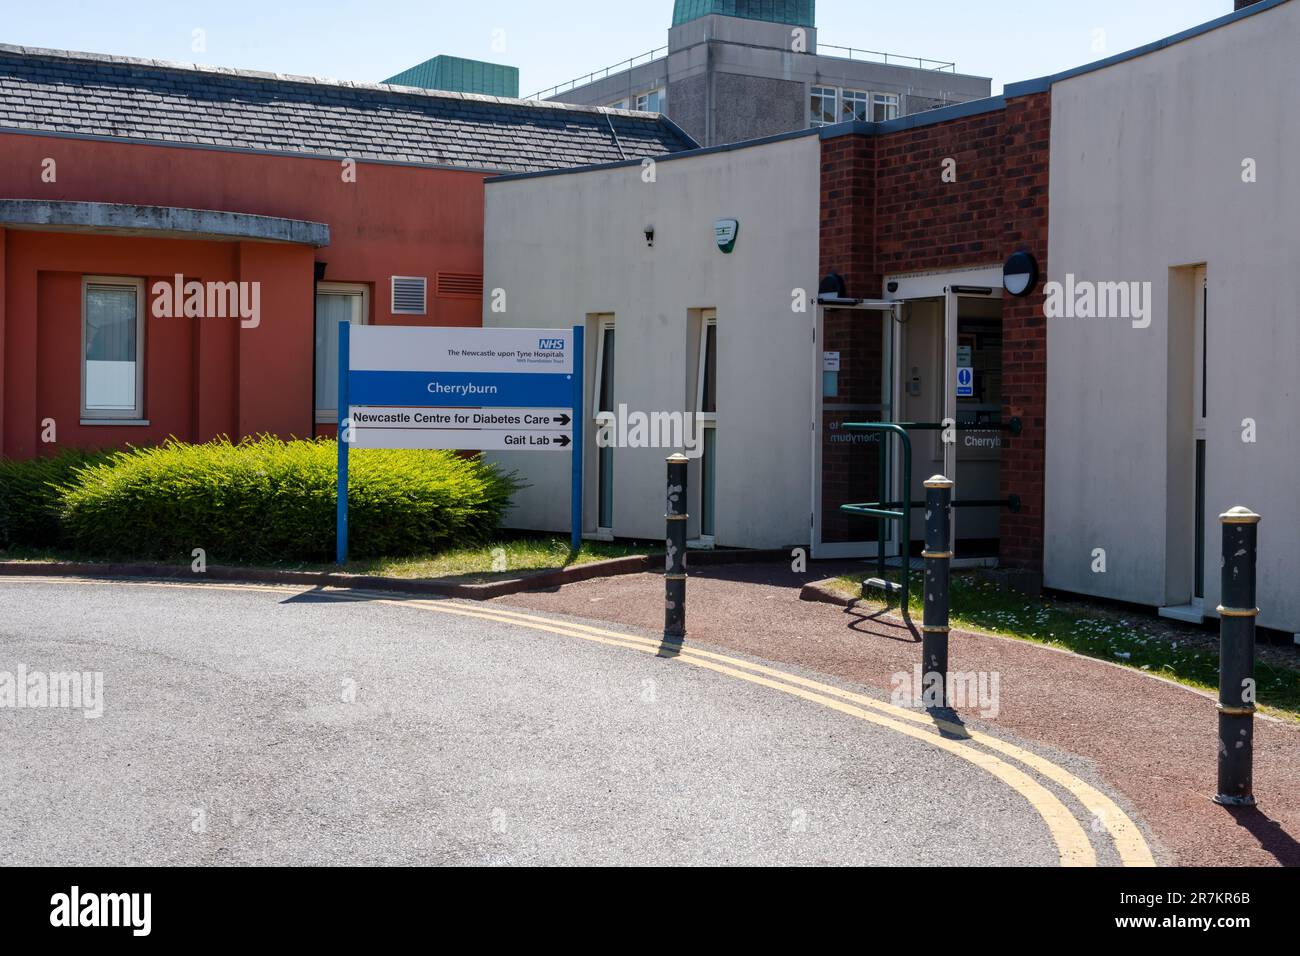 Newcastle Centre for Diabetes Care a Cherryburn nel Campus for Ageing and Vitality Westgate Road (ex General Hospital) Newcastle upon Tyne UK Foto Stock